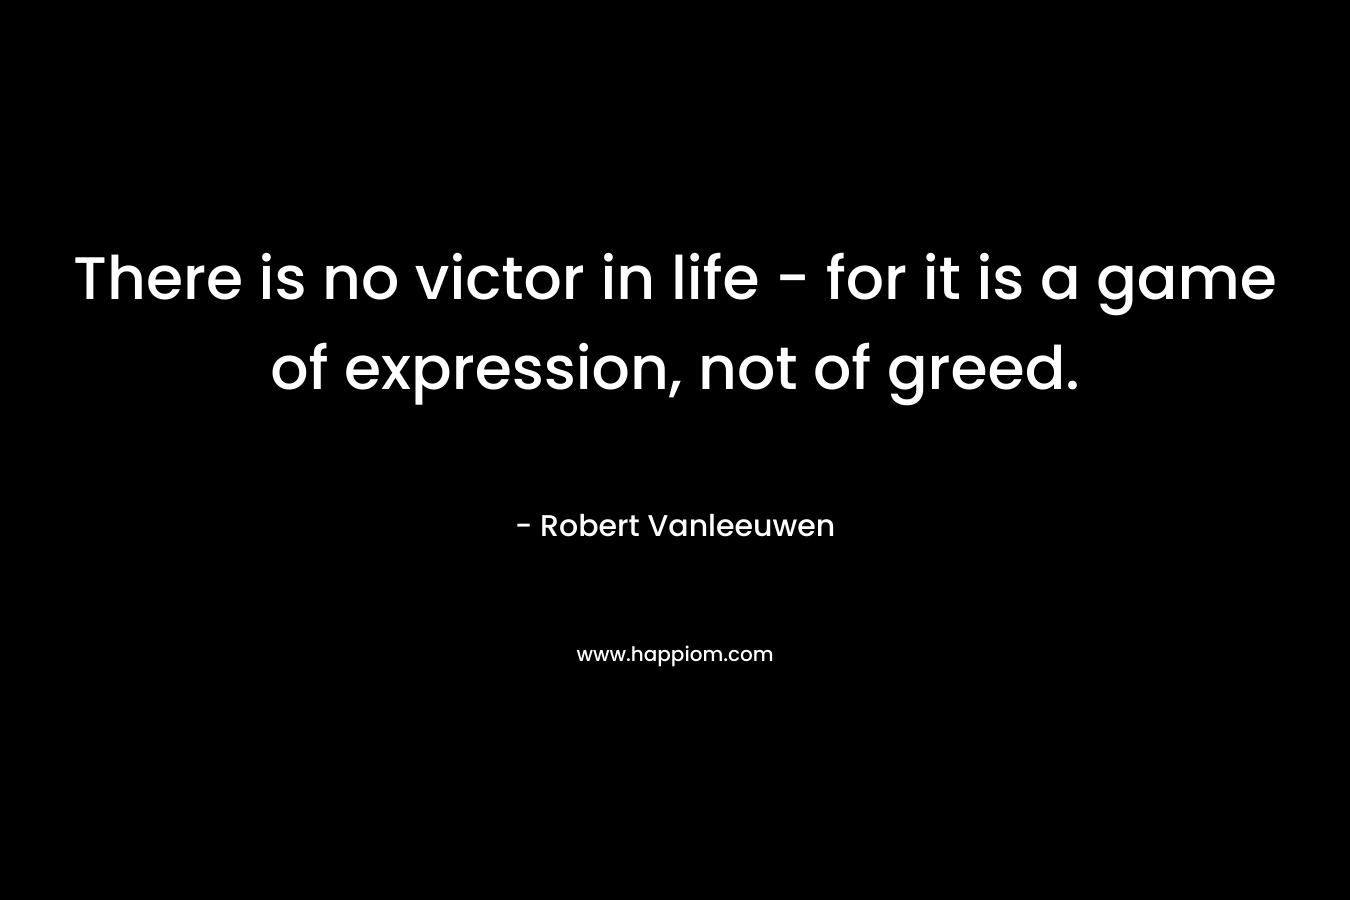 There is no victor in life - for it is a game of expression, not of greed.